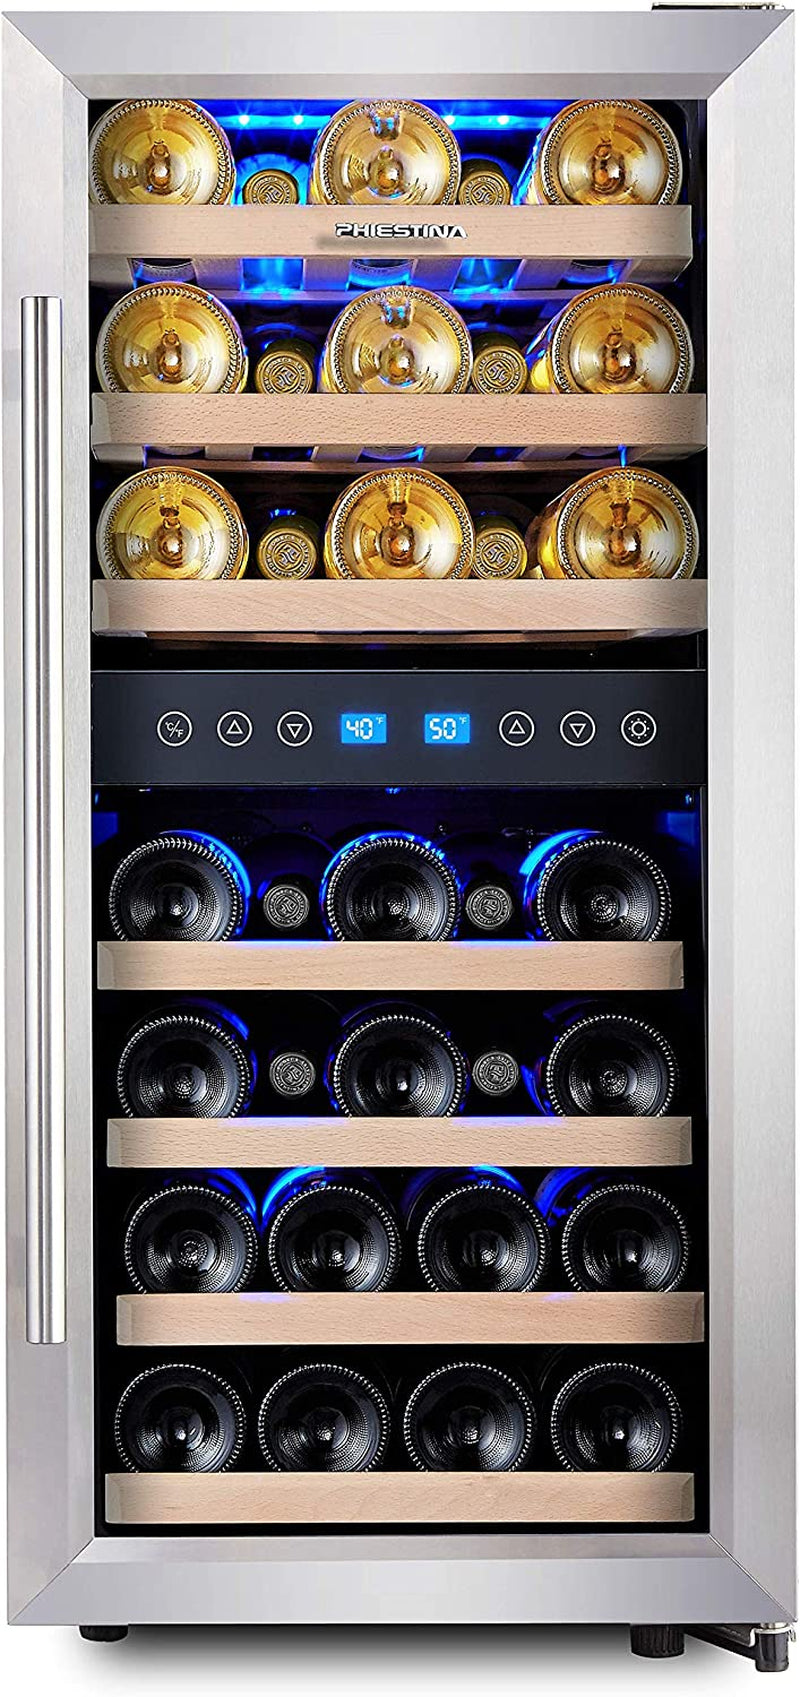 Dual Zone Wine Cooler Refrigerator - 33 Bottle Free Standing Compressor Fridge and Chiller for Red and White Wines - 16'' Glass Door Wine Refrigerator with Digital Memory Temperature Control